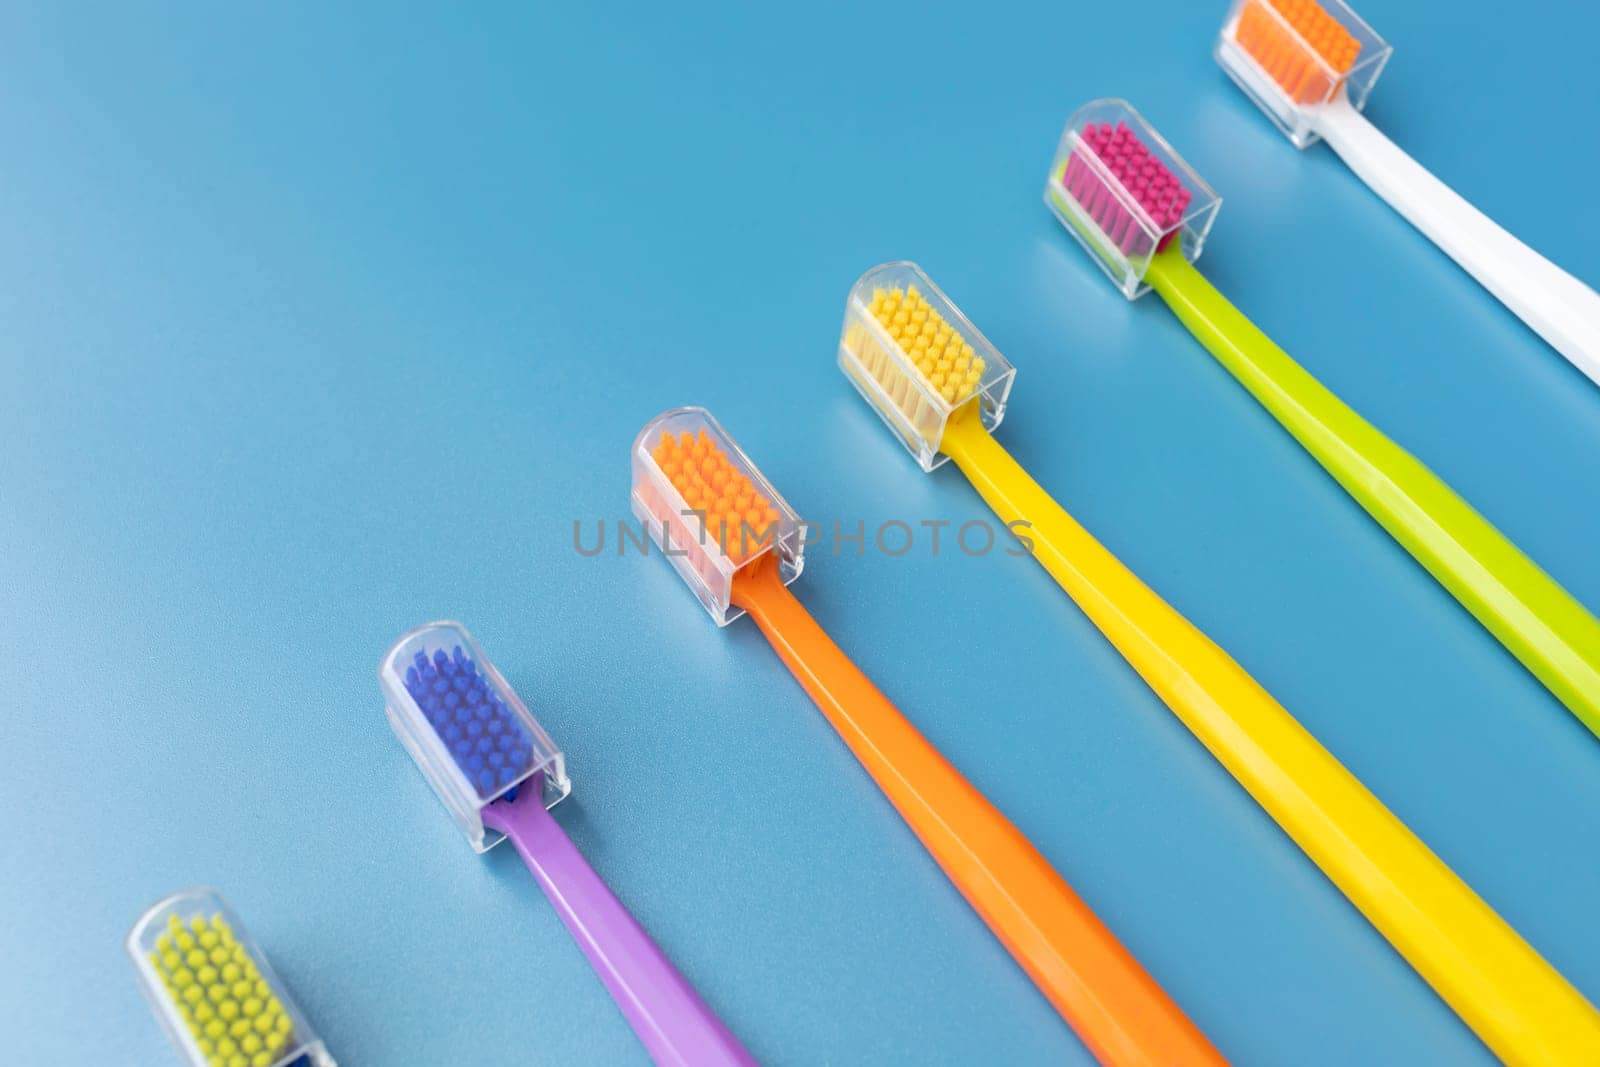 Top View Many Colorful Antibacterial Toothbrushes on Blue Background. Flat Lay Set for Dental Hygiene, Bathing Self Care Products. Horizontal Plane by netatsi